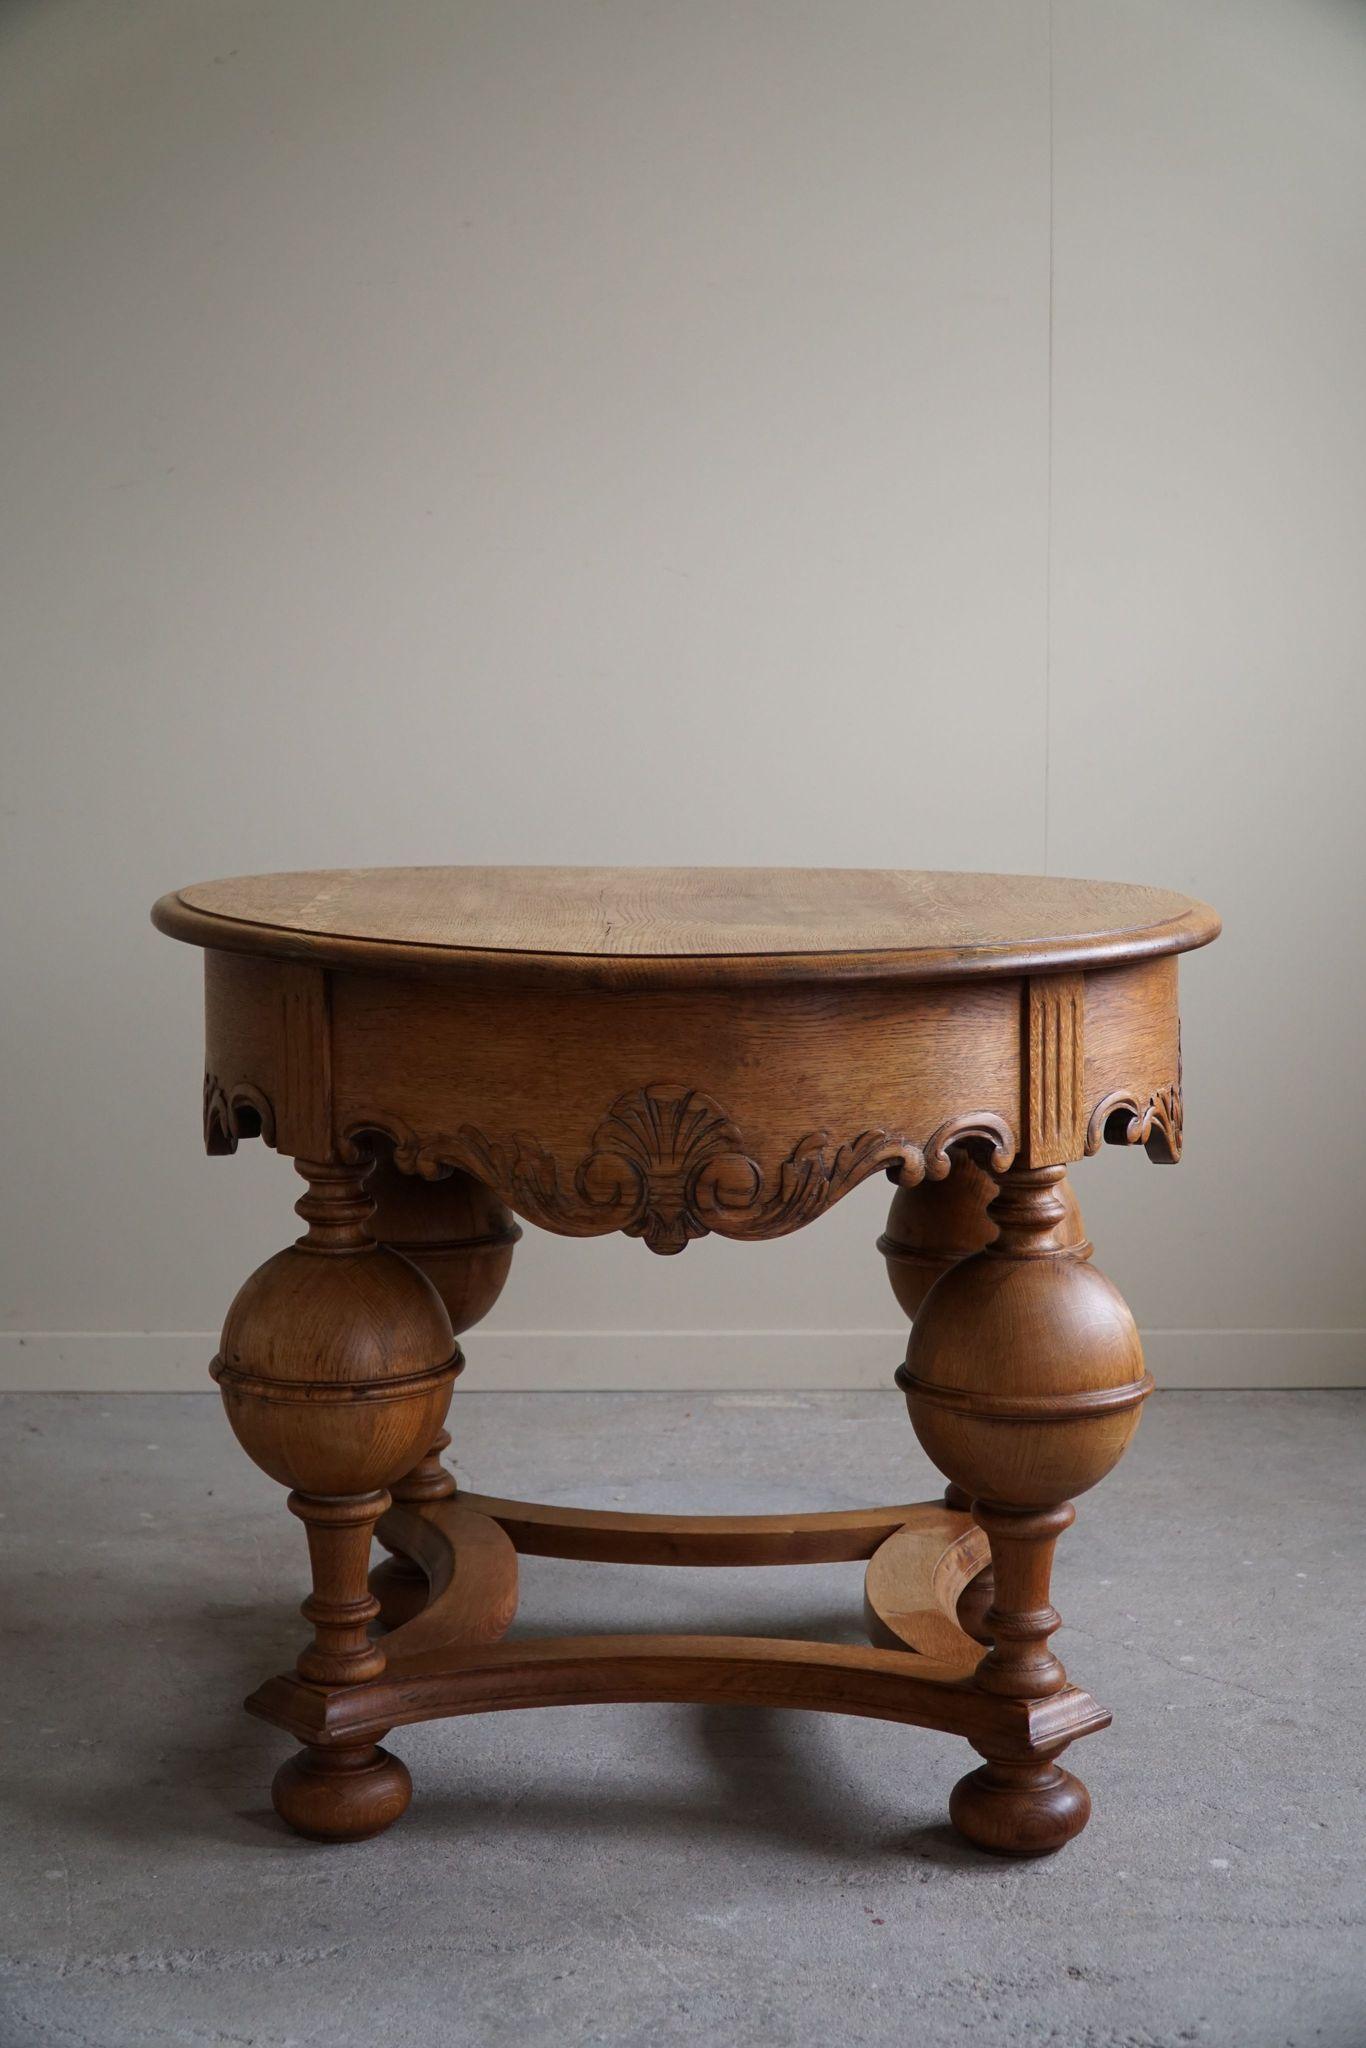 Antique Side Table in Solid Oak, Made by a Danish Cabinetmaker, 19th Century For Sale 2